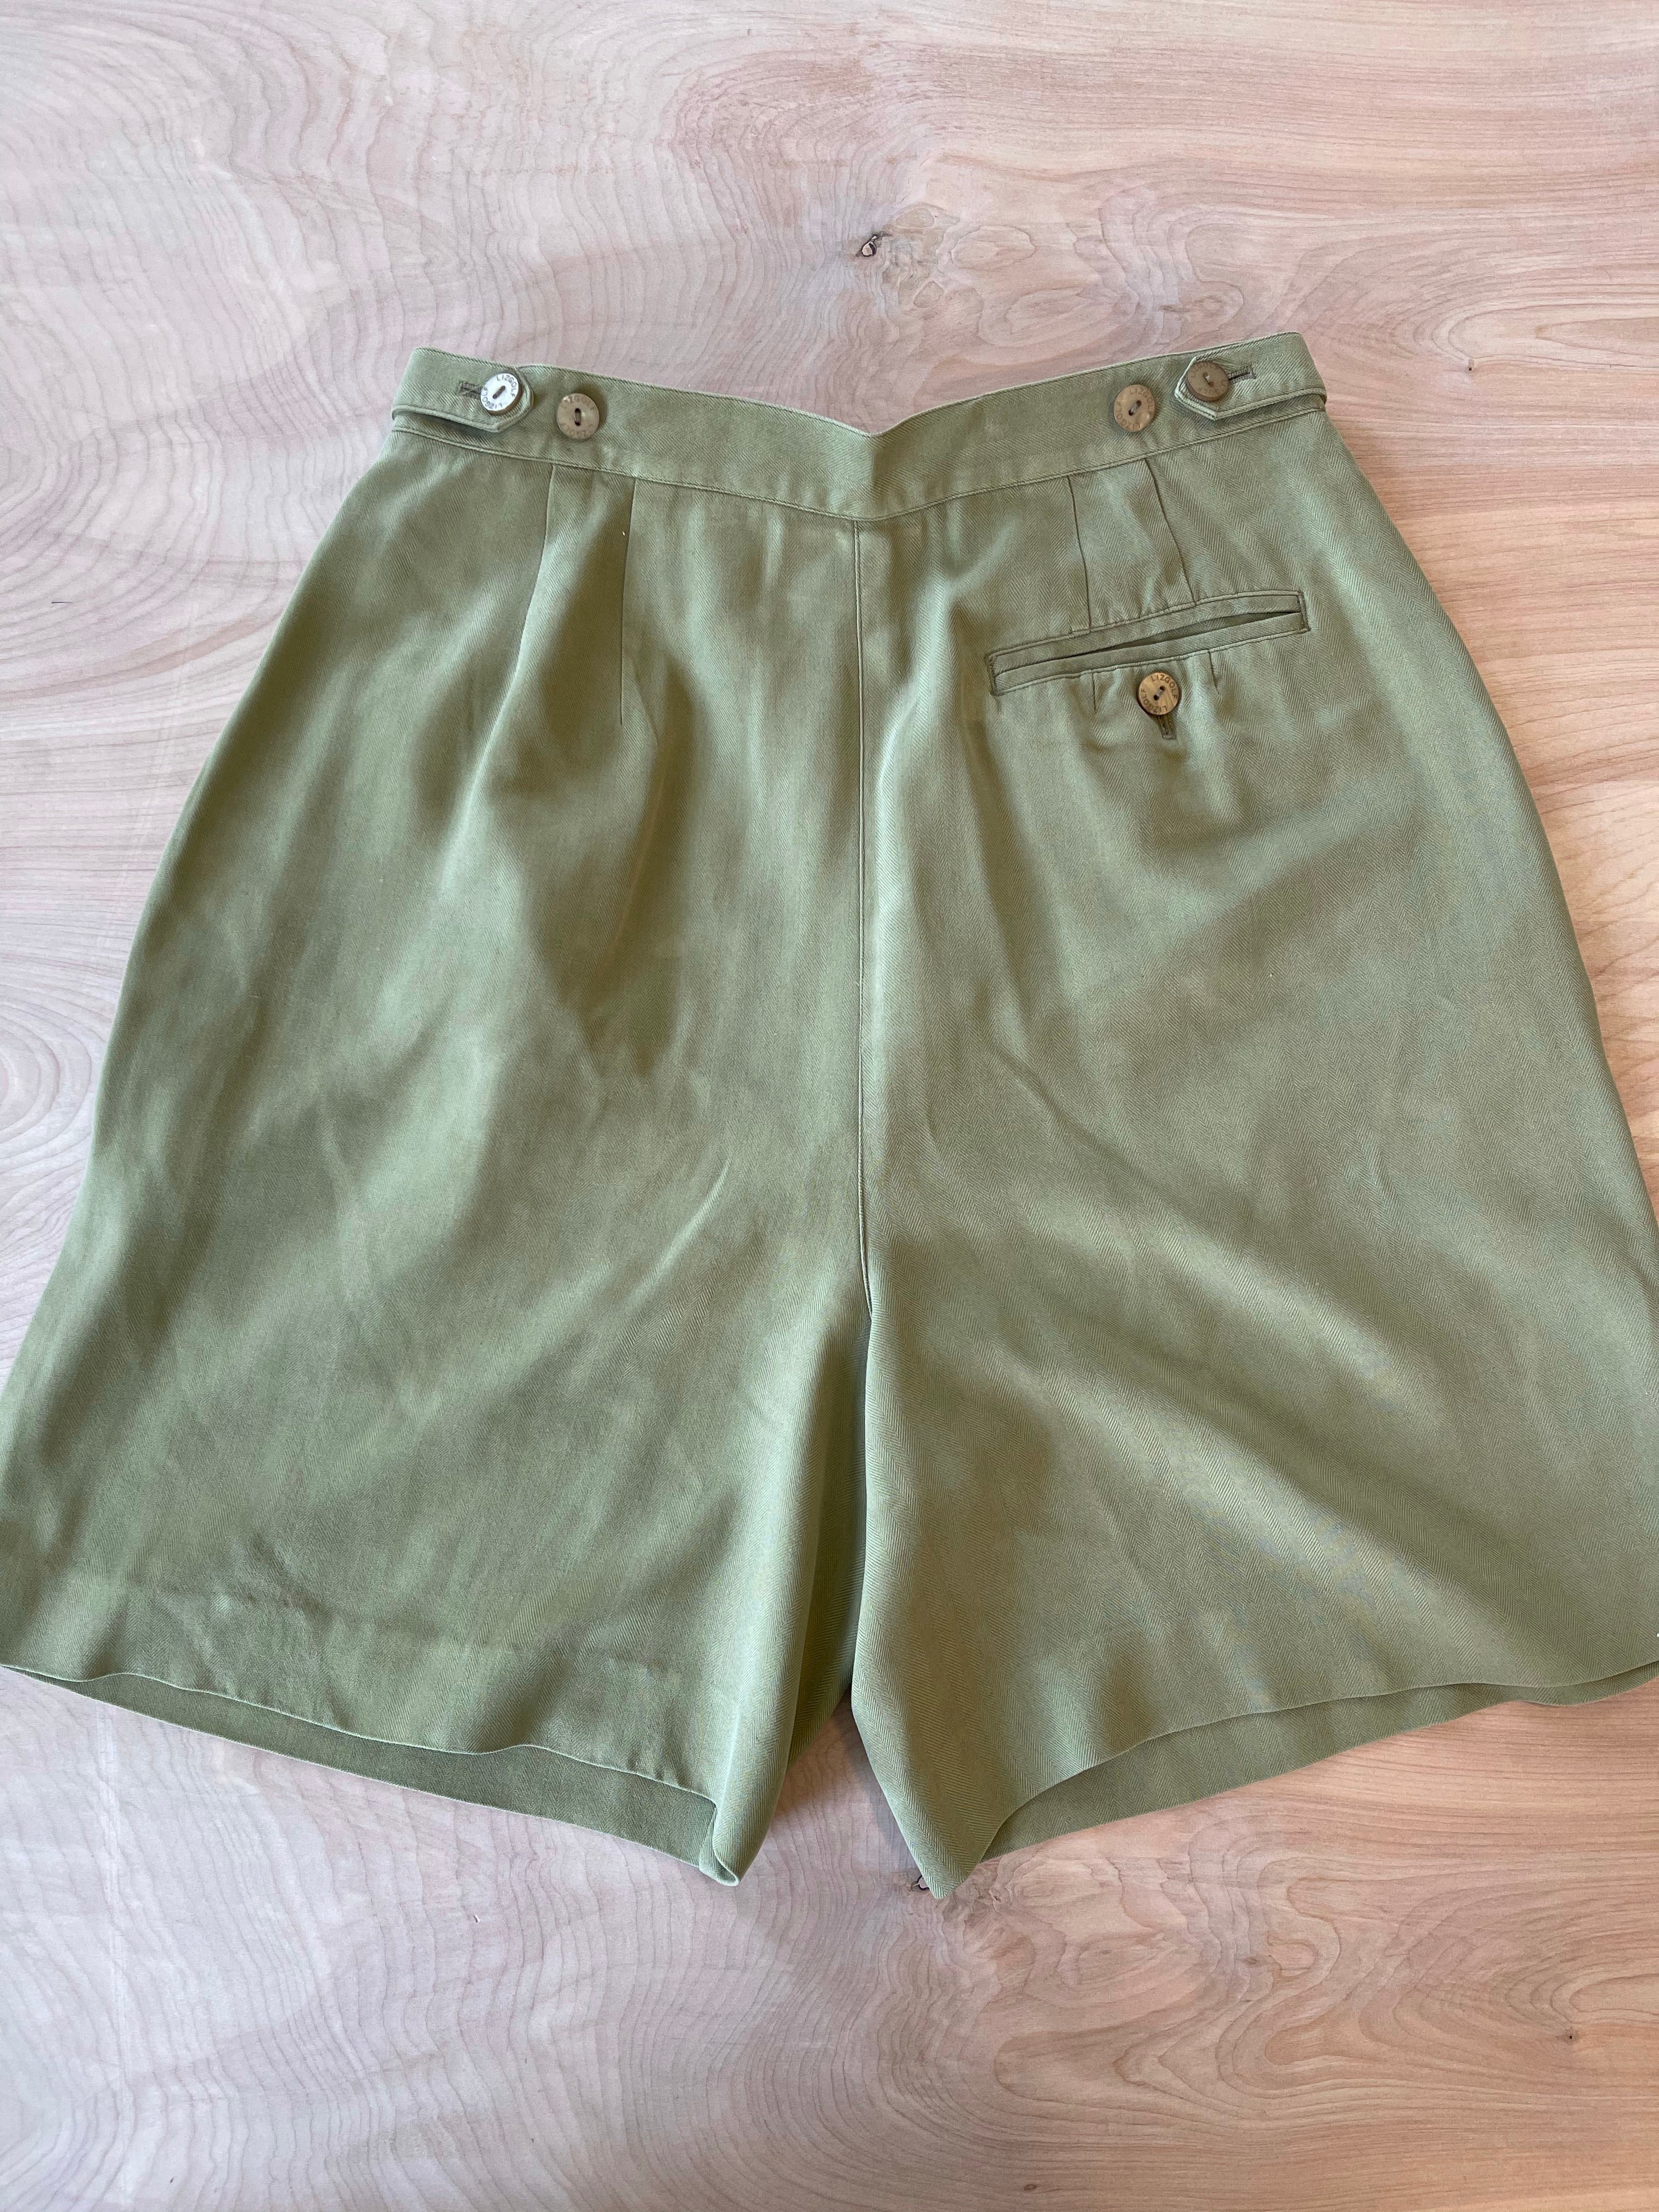 On the Green Shorts